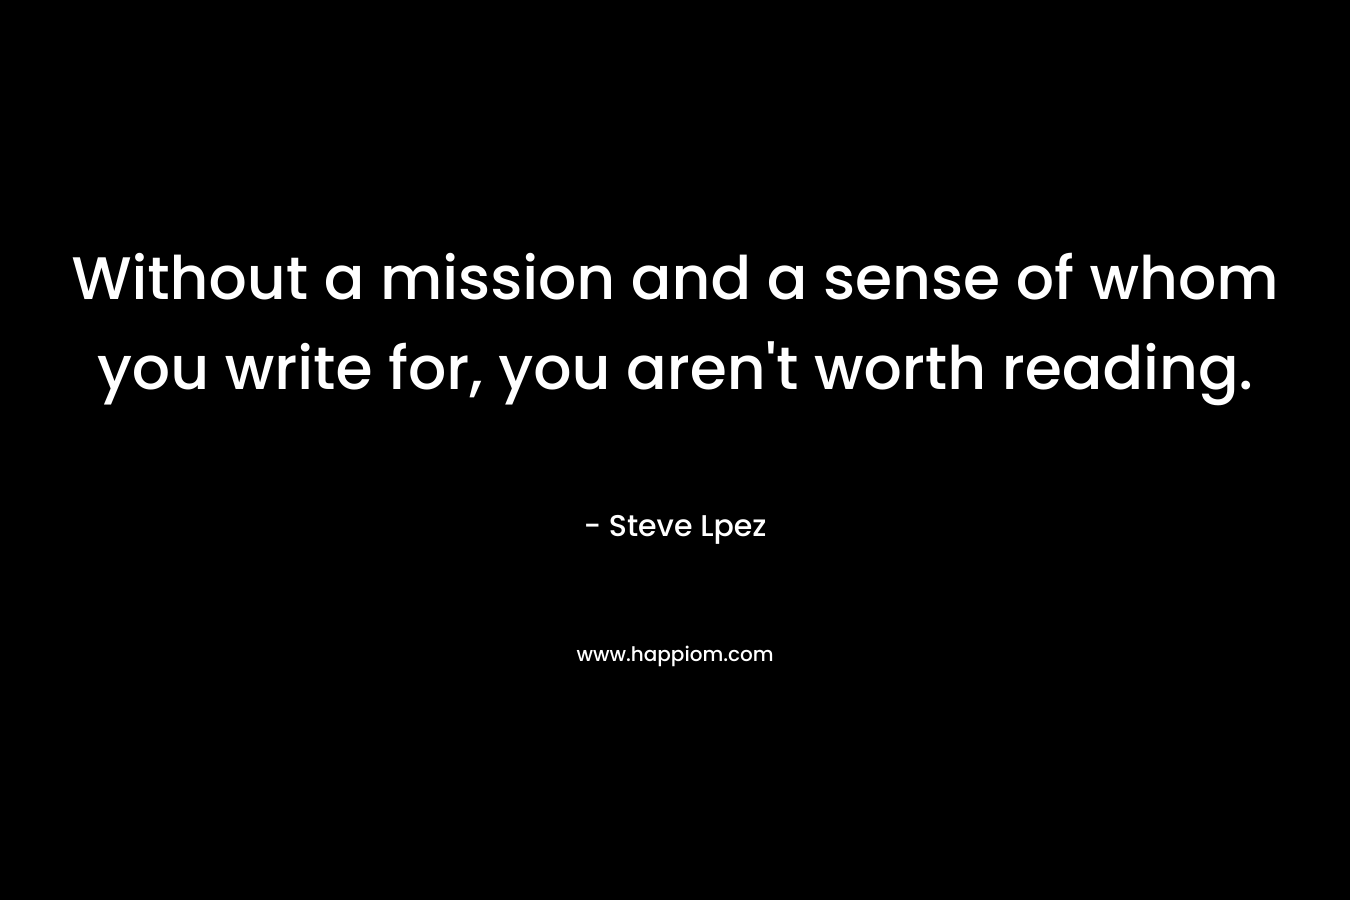 Without a mission and a sense of whom you write for, you aren't worth reading.